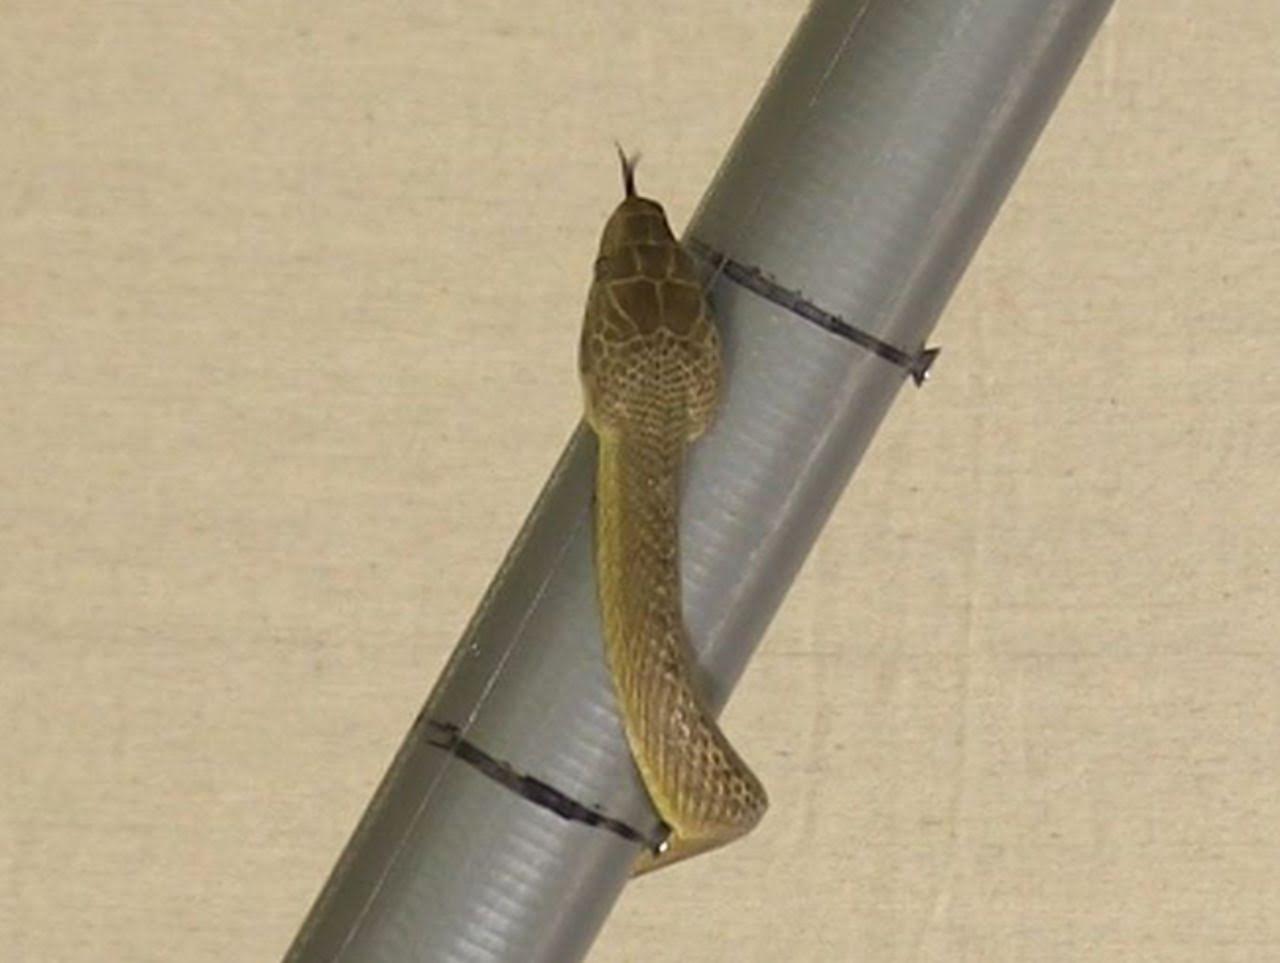 A brown tree snake climbs up a pole with pegs. Credit: Bruce Jayne